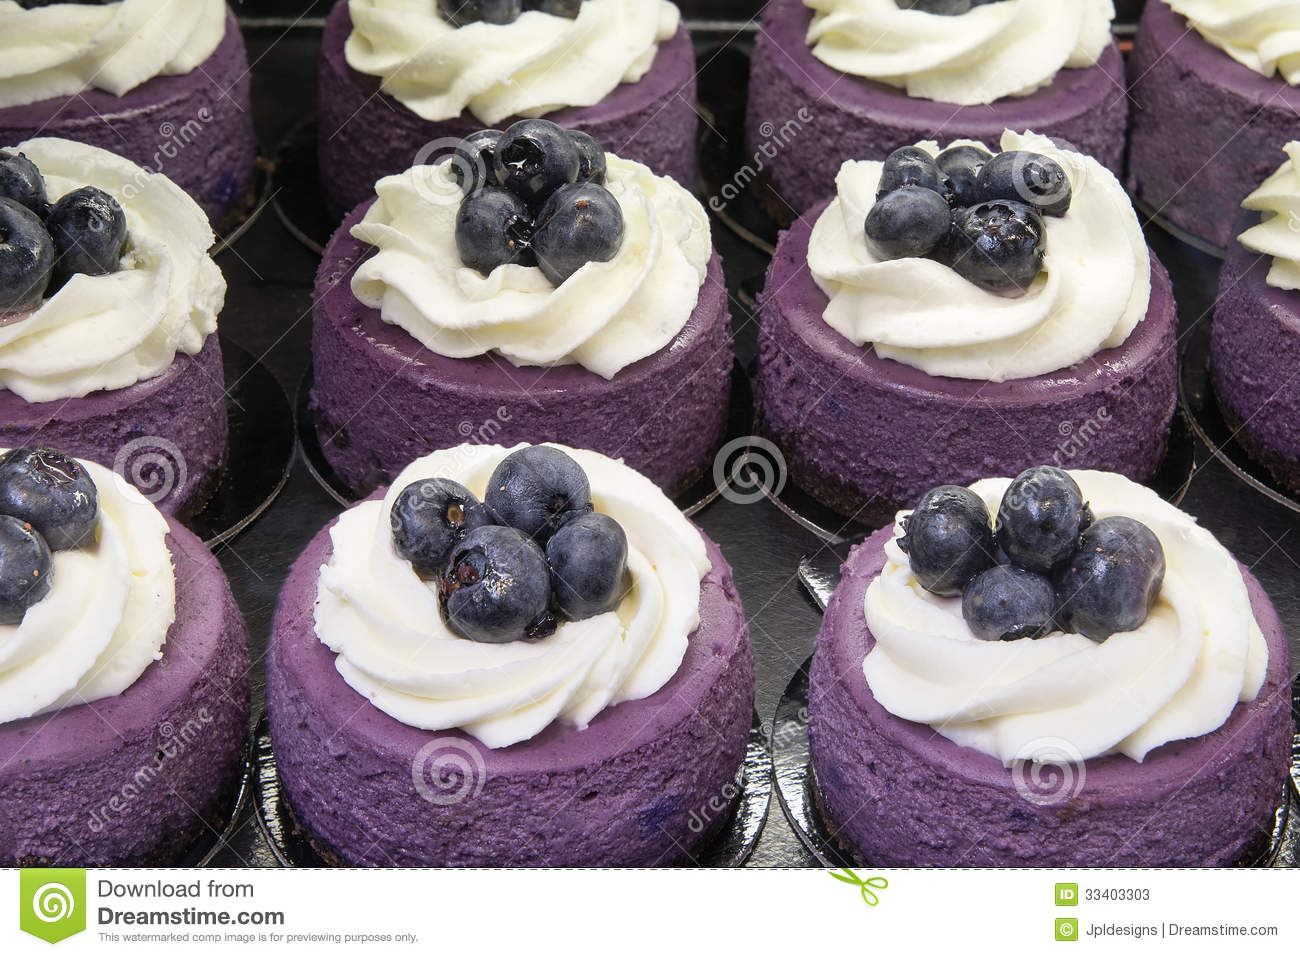 Blueberry Mousse Cake Topped With Blueberries And Whipped Cream At